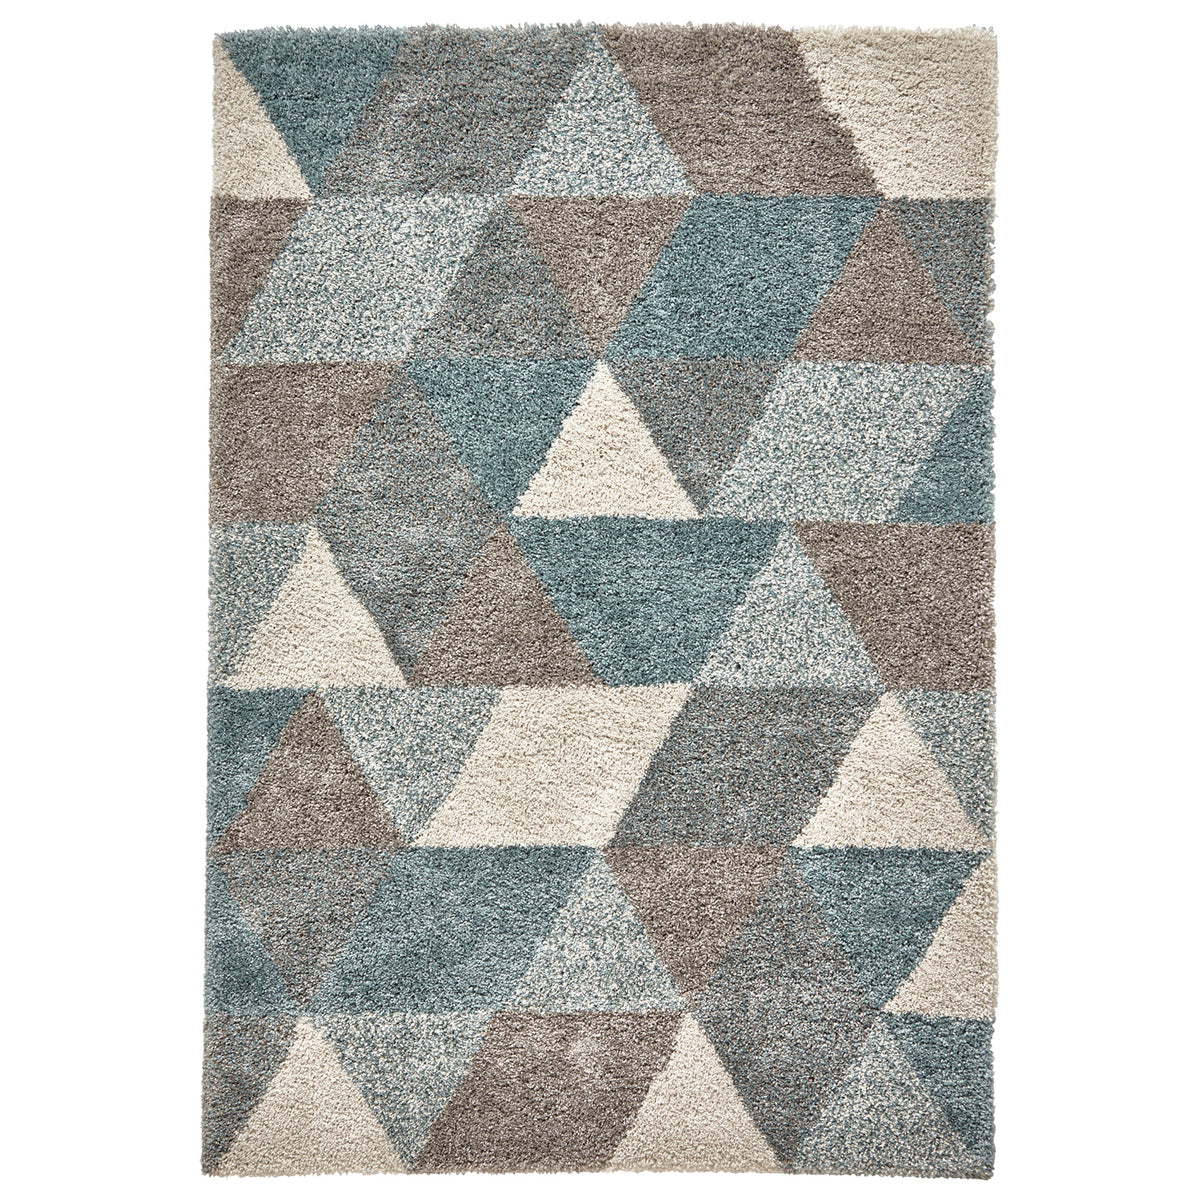 Webster Teal Triangle Geometric Rug from Roseland Furniture